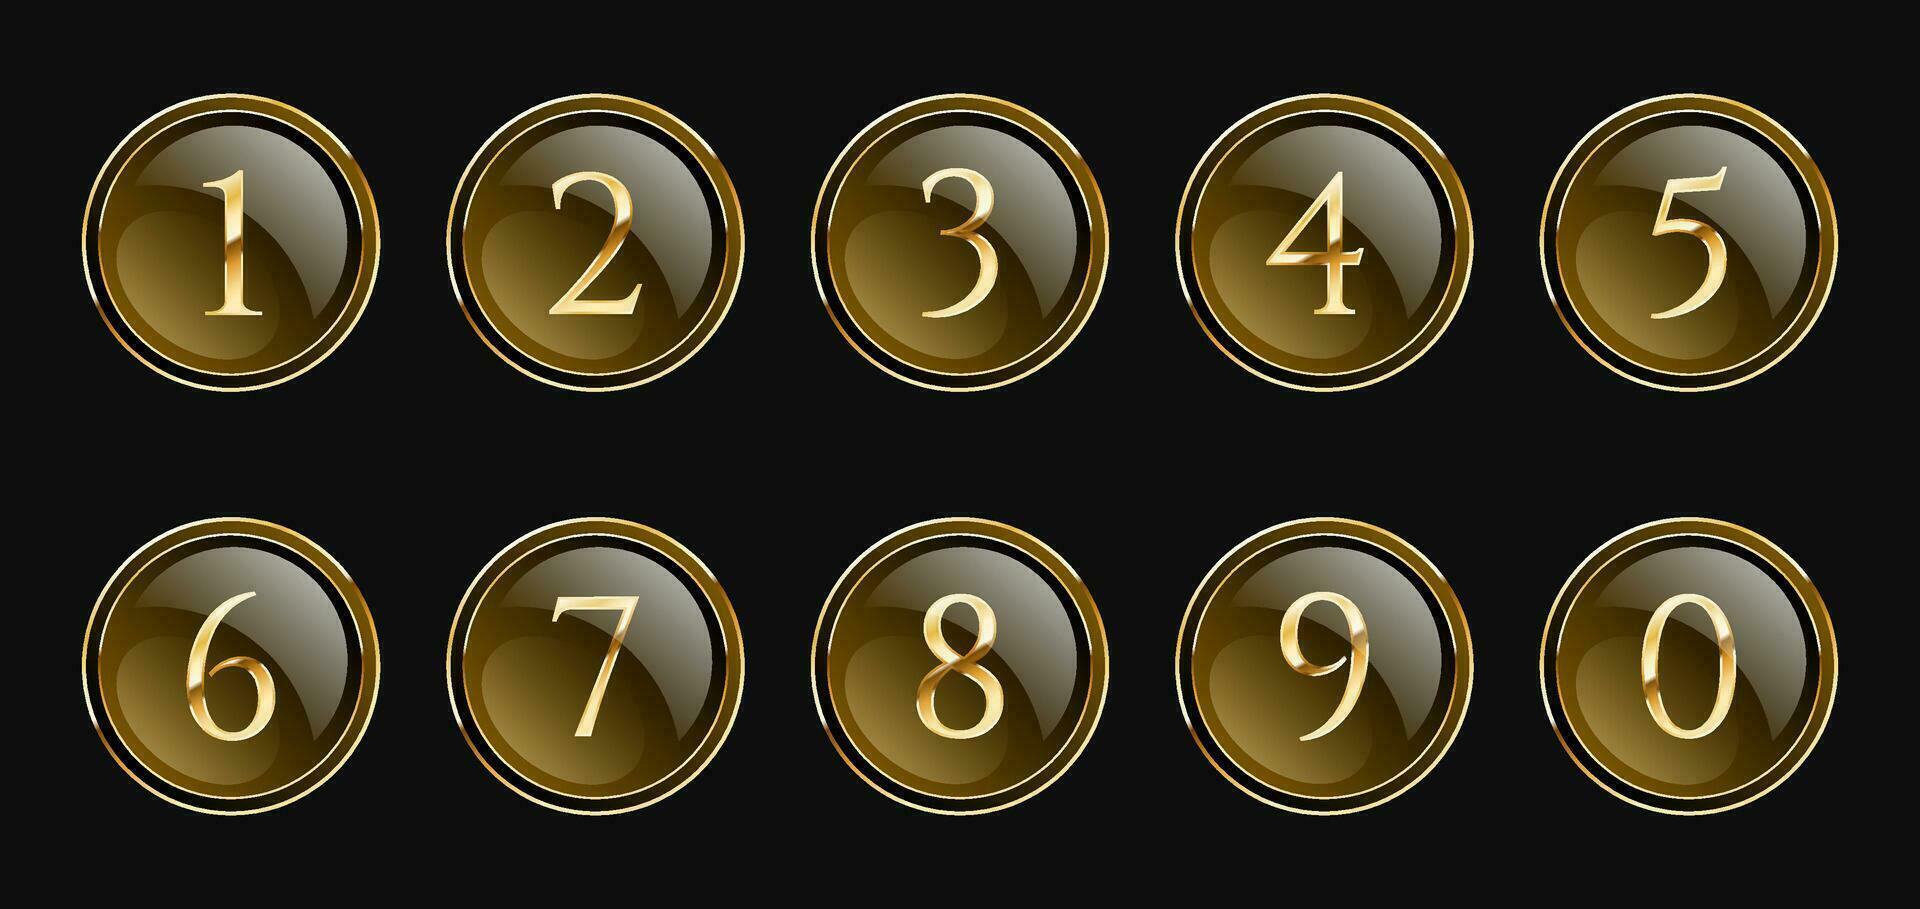 Set of golden luxury numbers, mathematical symbols in realistic vector golden style, in golden circles, glossy buttons.